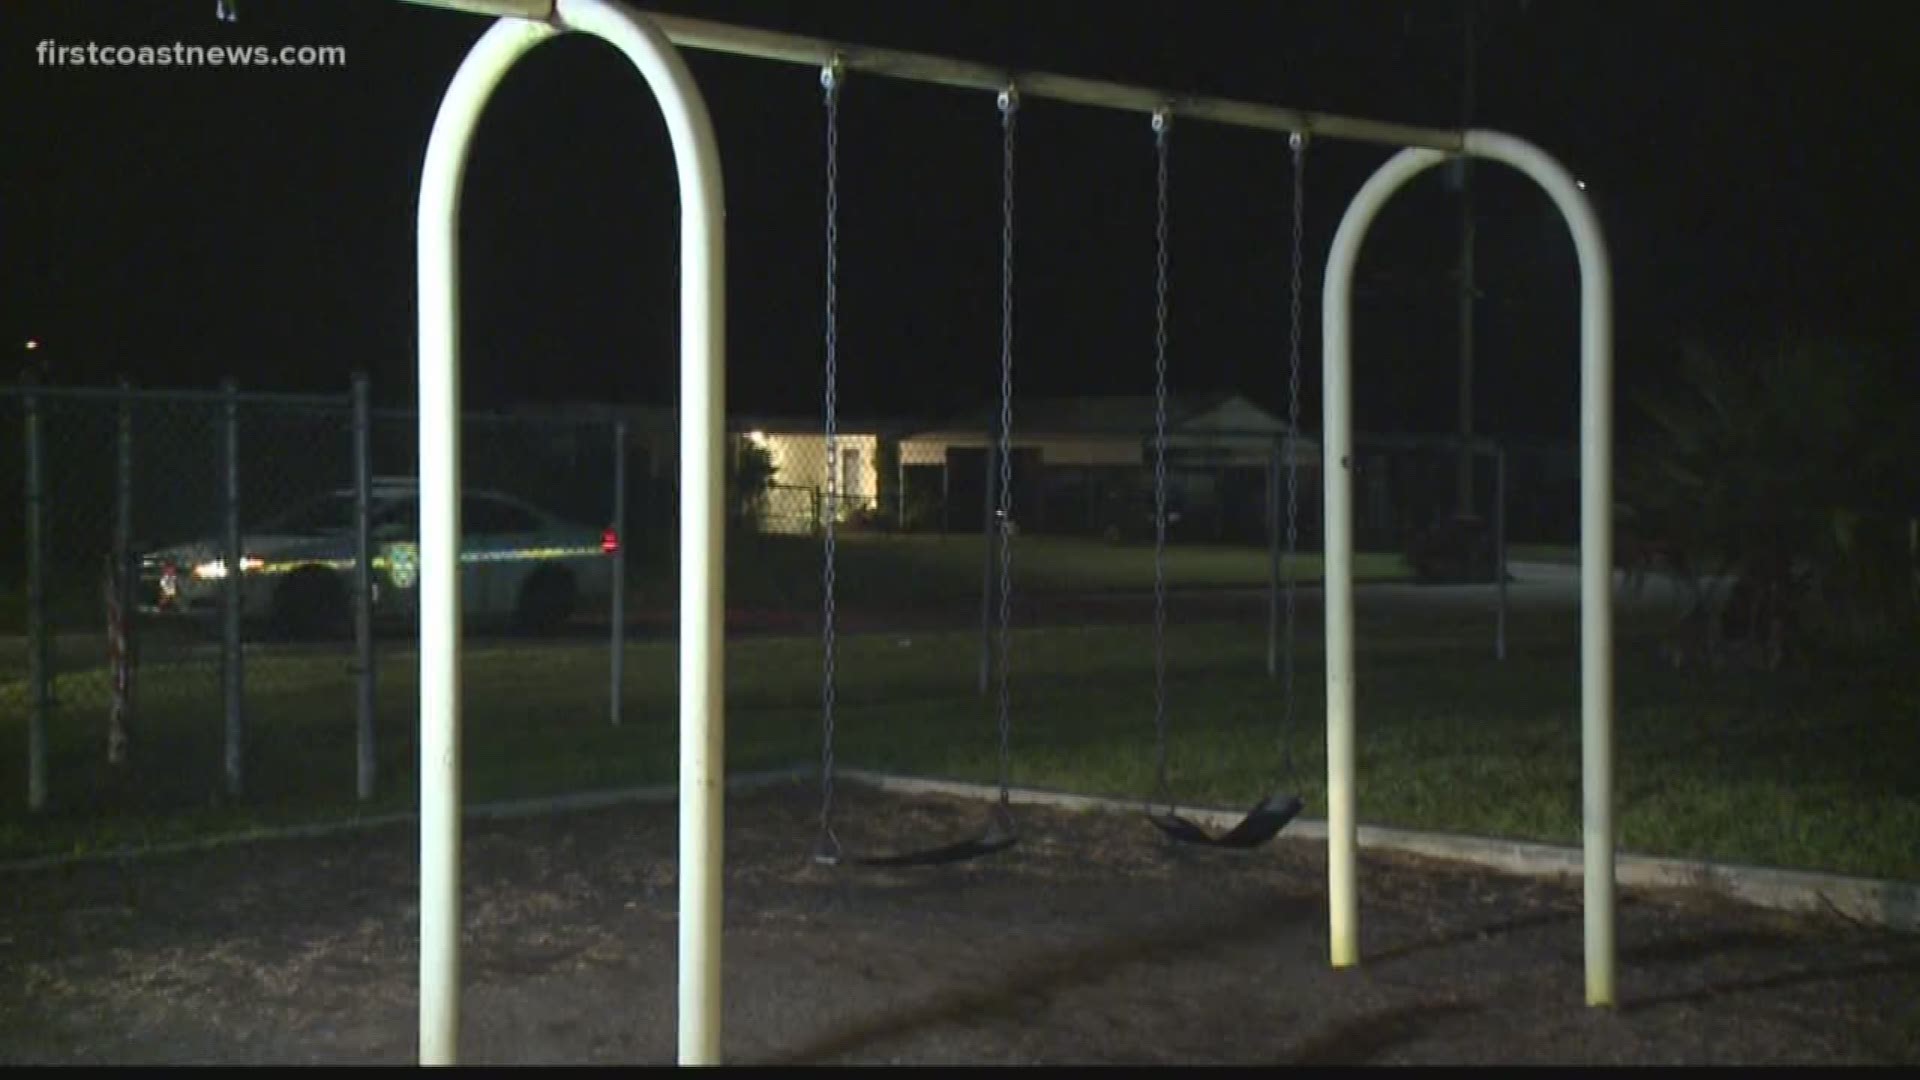 A 10-year-old boy died in a tragic accident at Charles Clark Park on Friday, prompting questions of safety once again at public parks in Jacksonville.